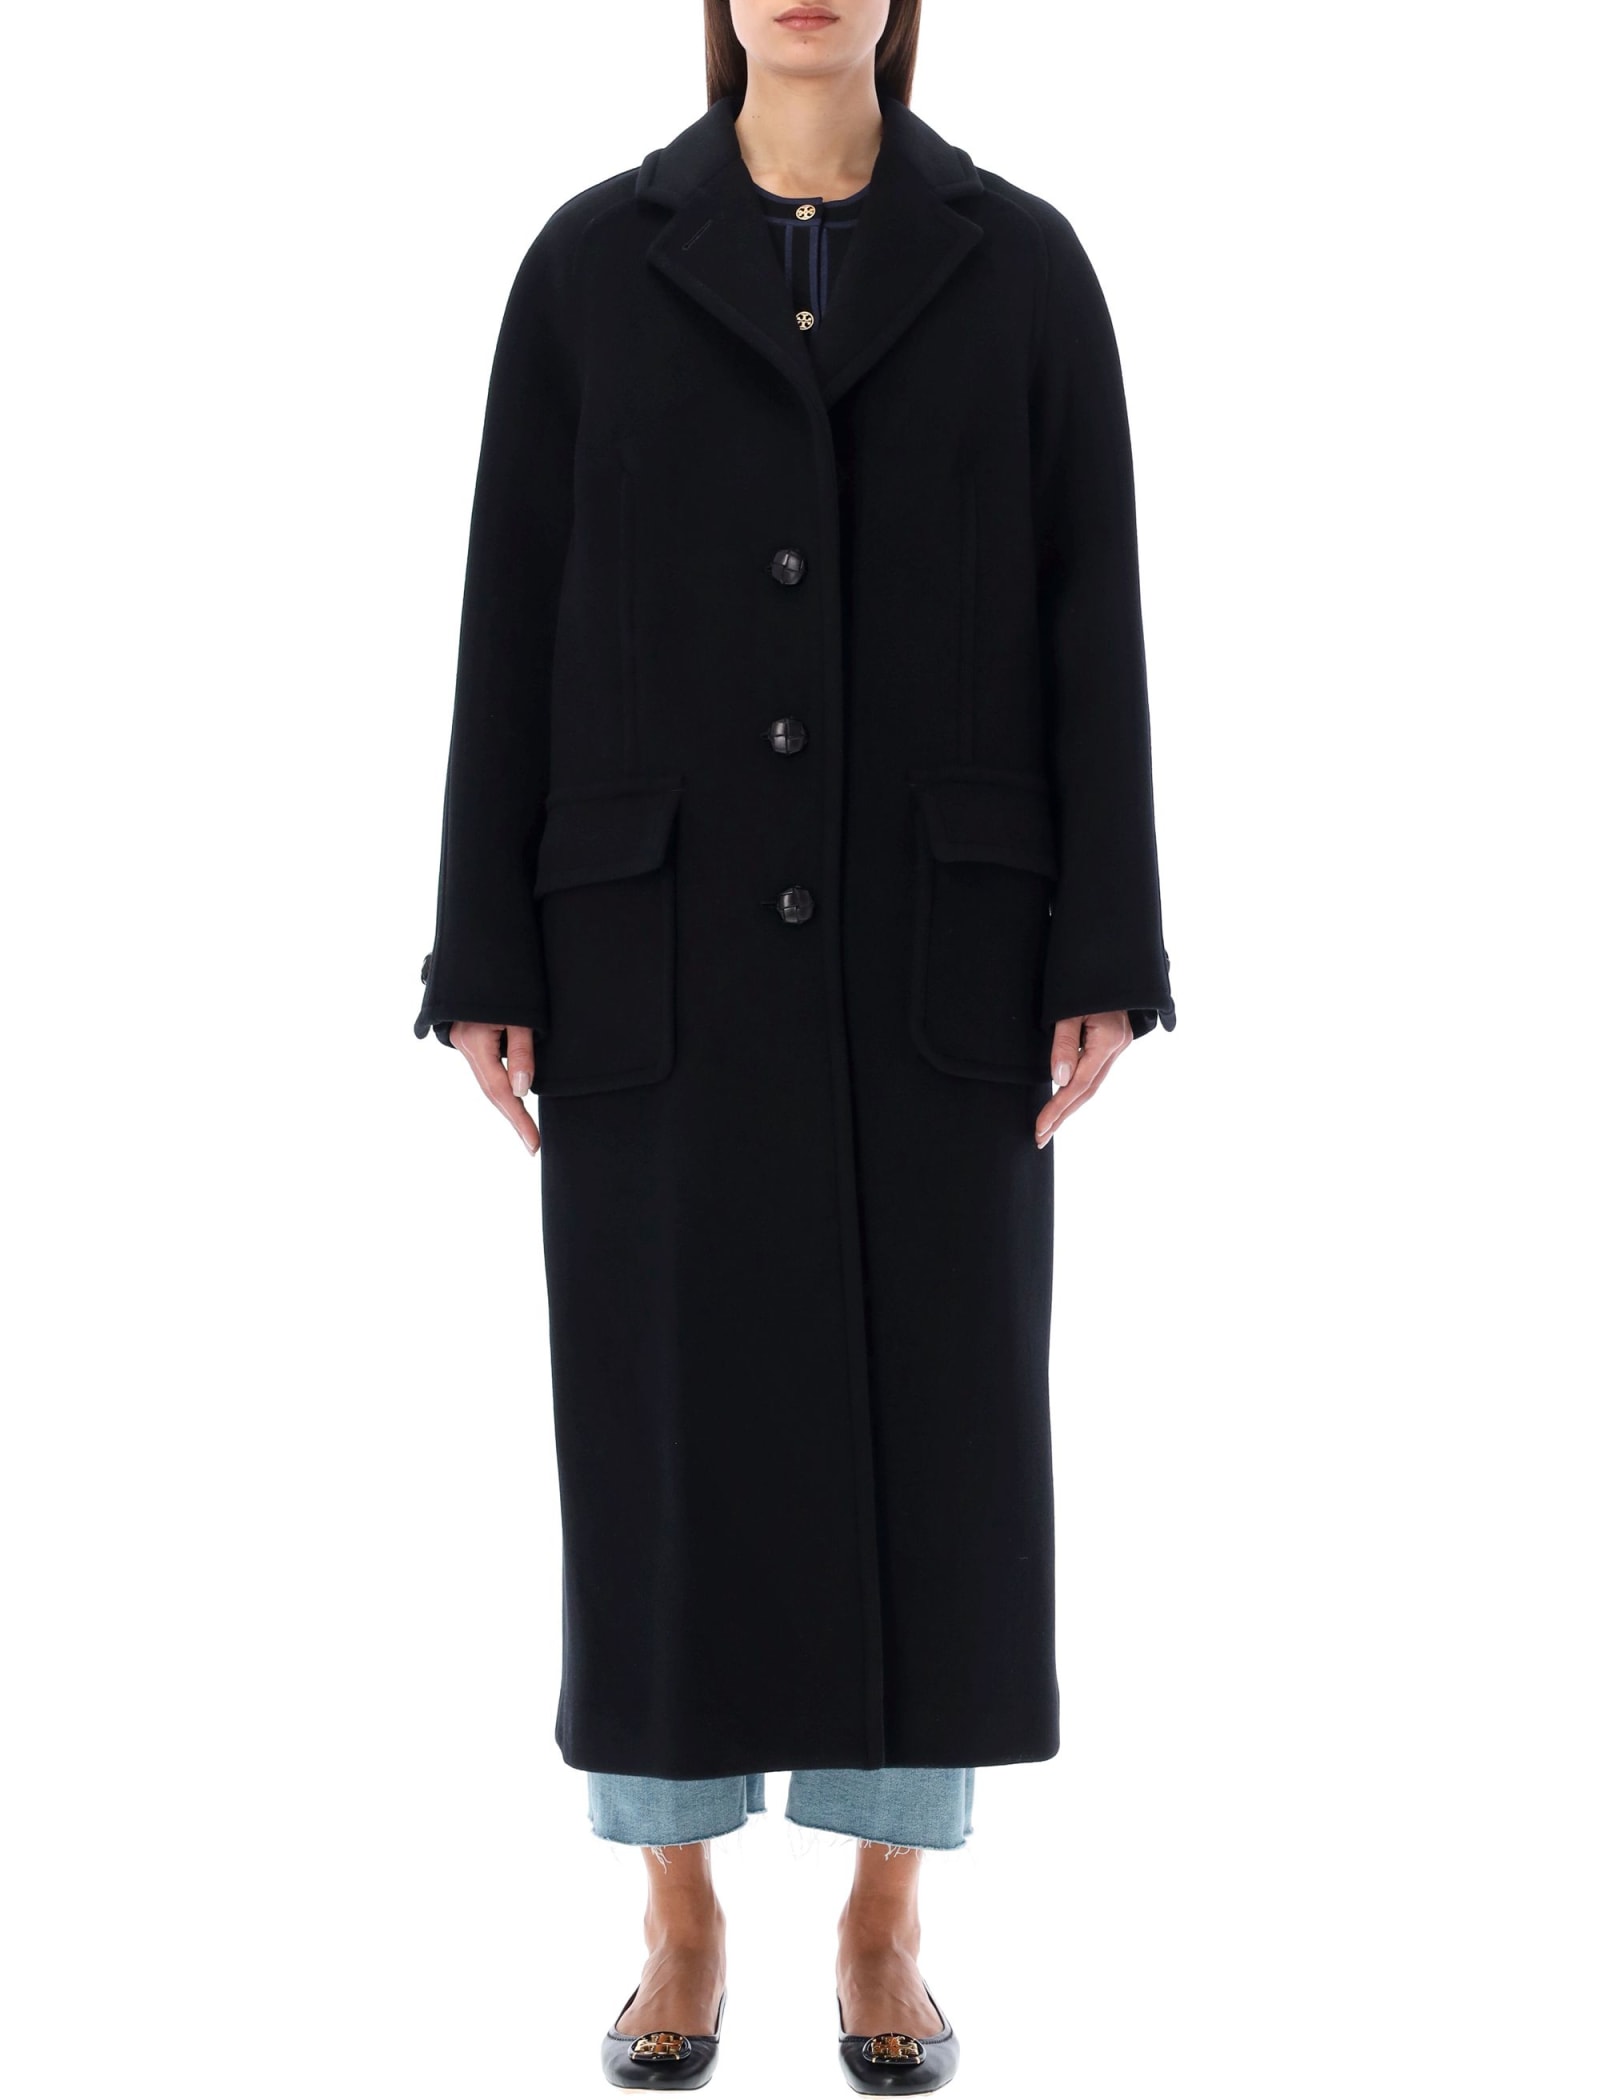 Tory Burch Double-faced Wool Overcoat